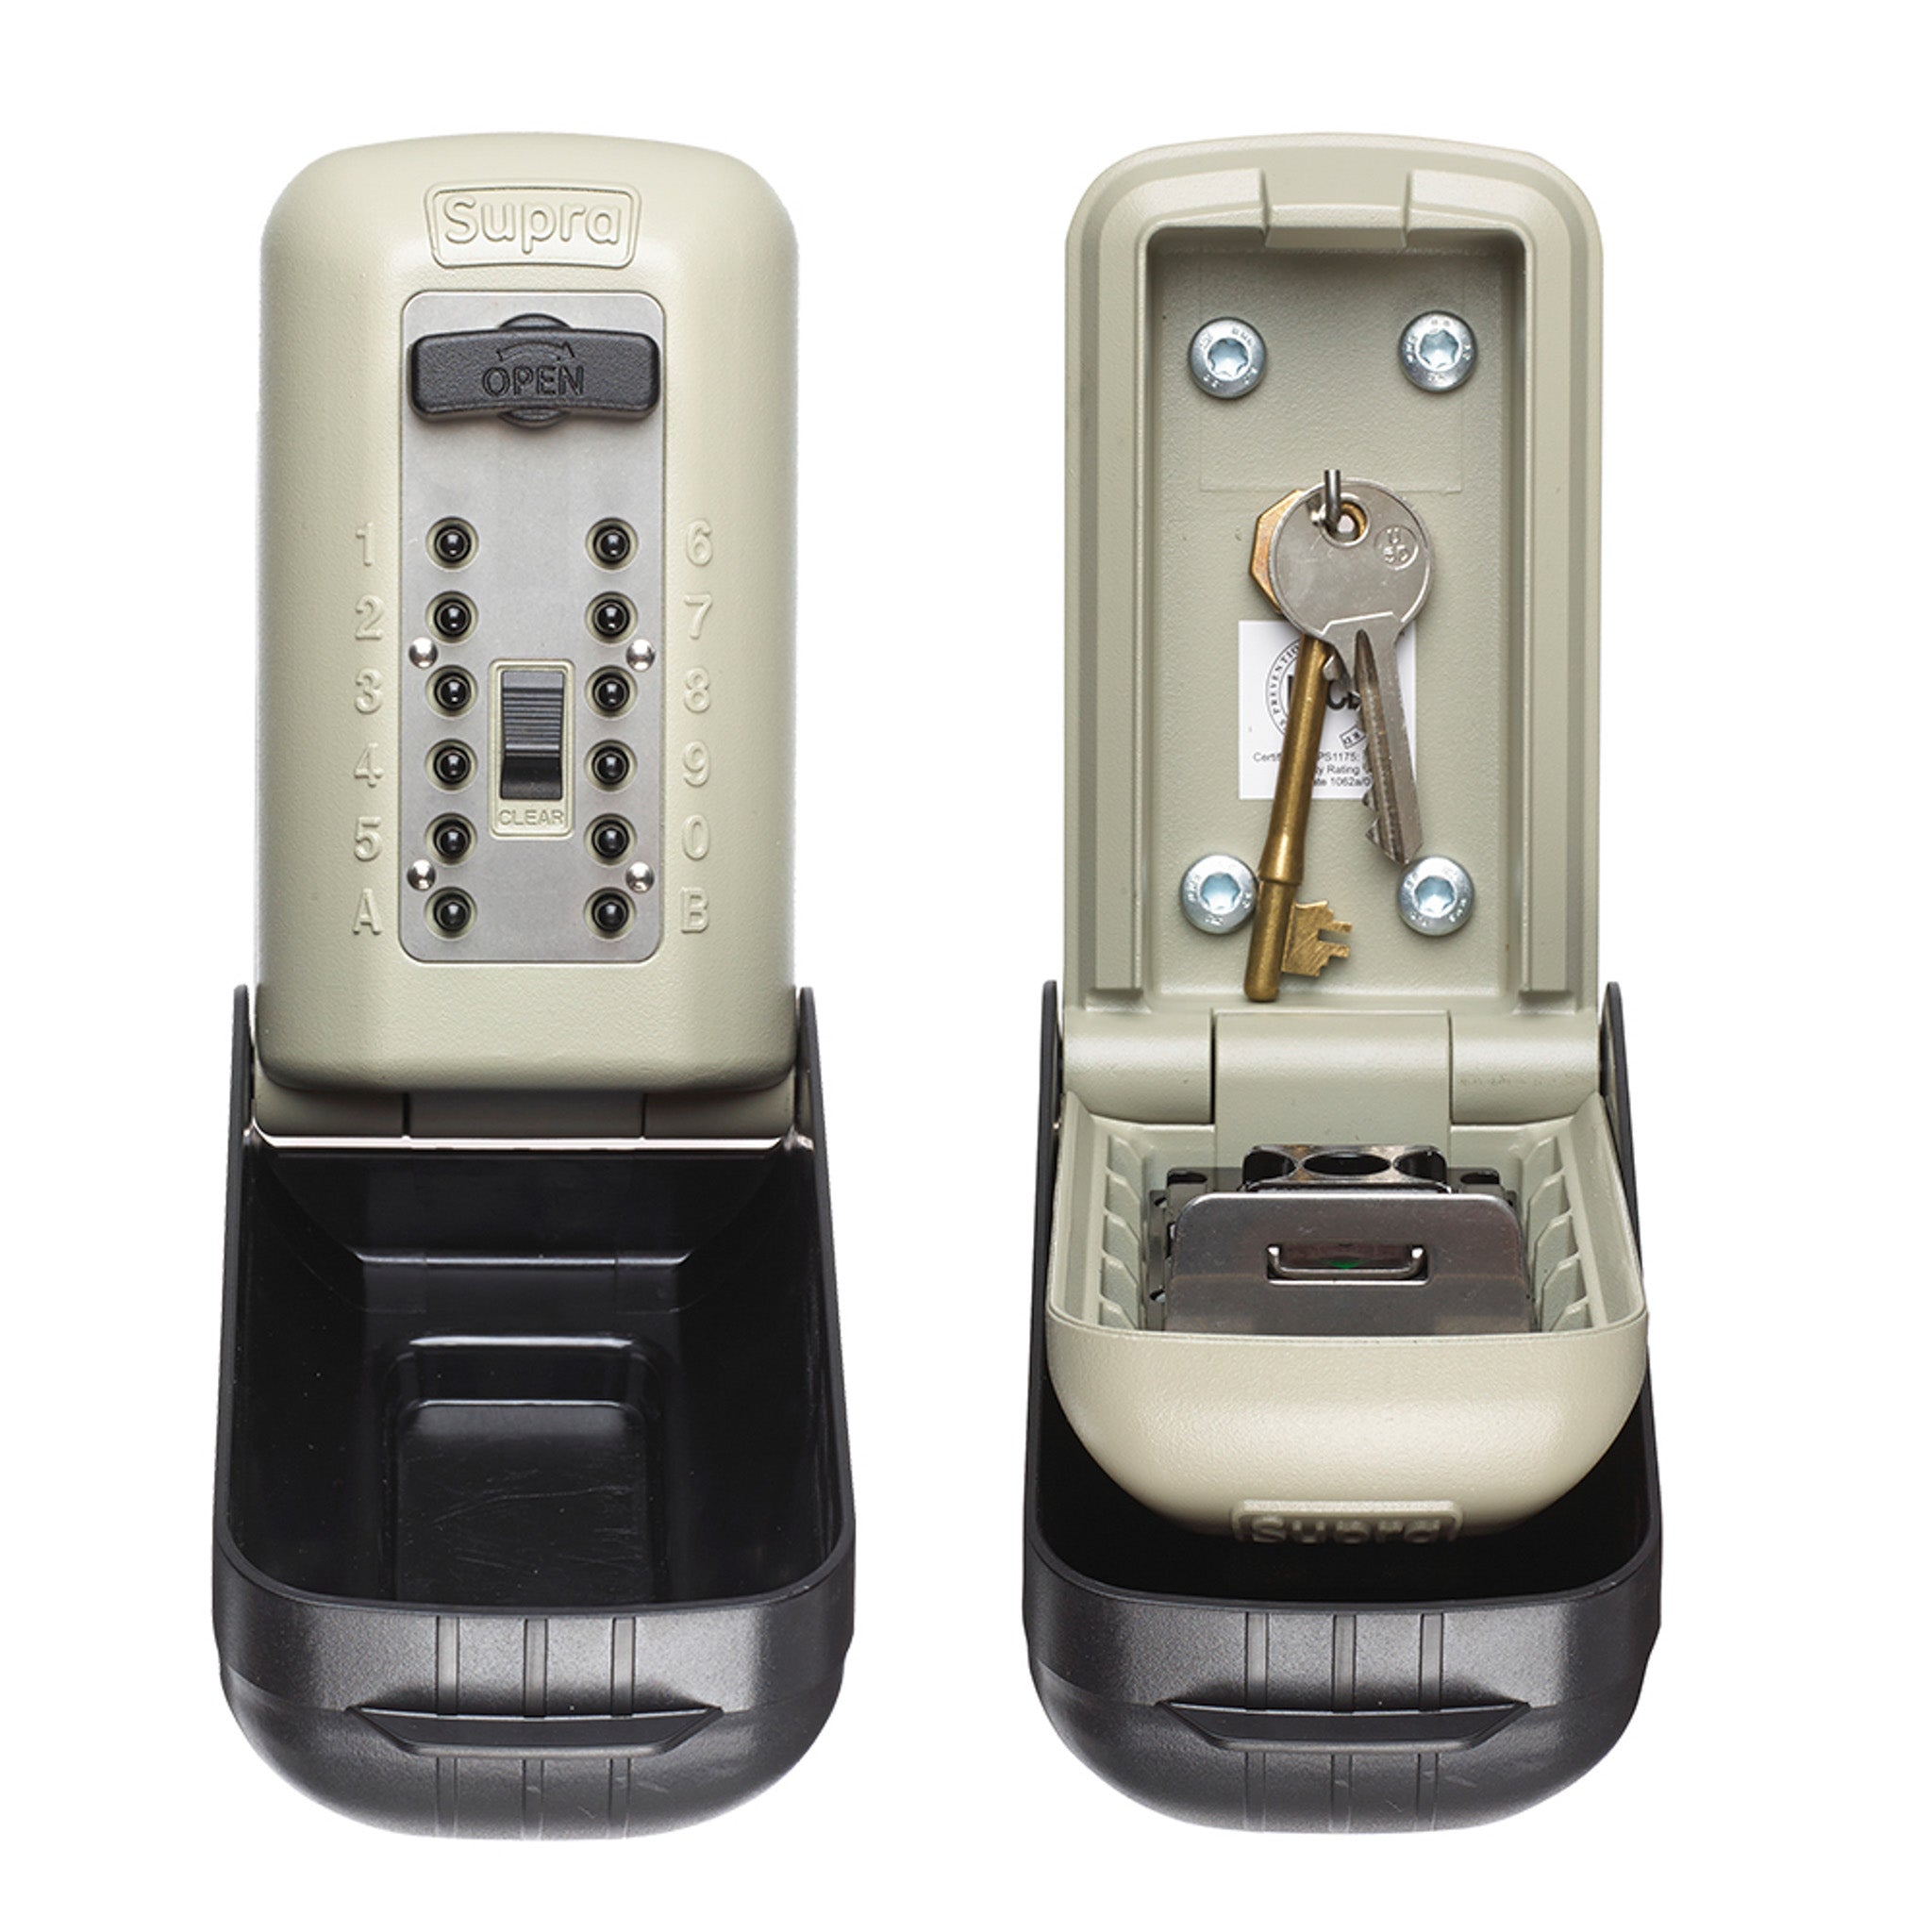 2 police preferred Supra C500 Pro key safes side by side with one open showing 2 keys attached to key hook